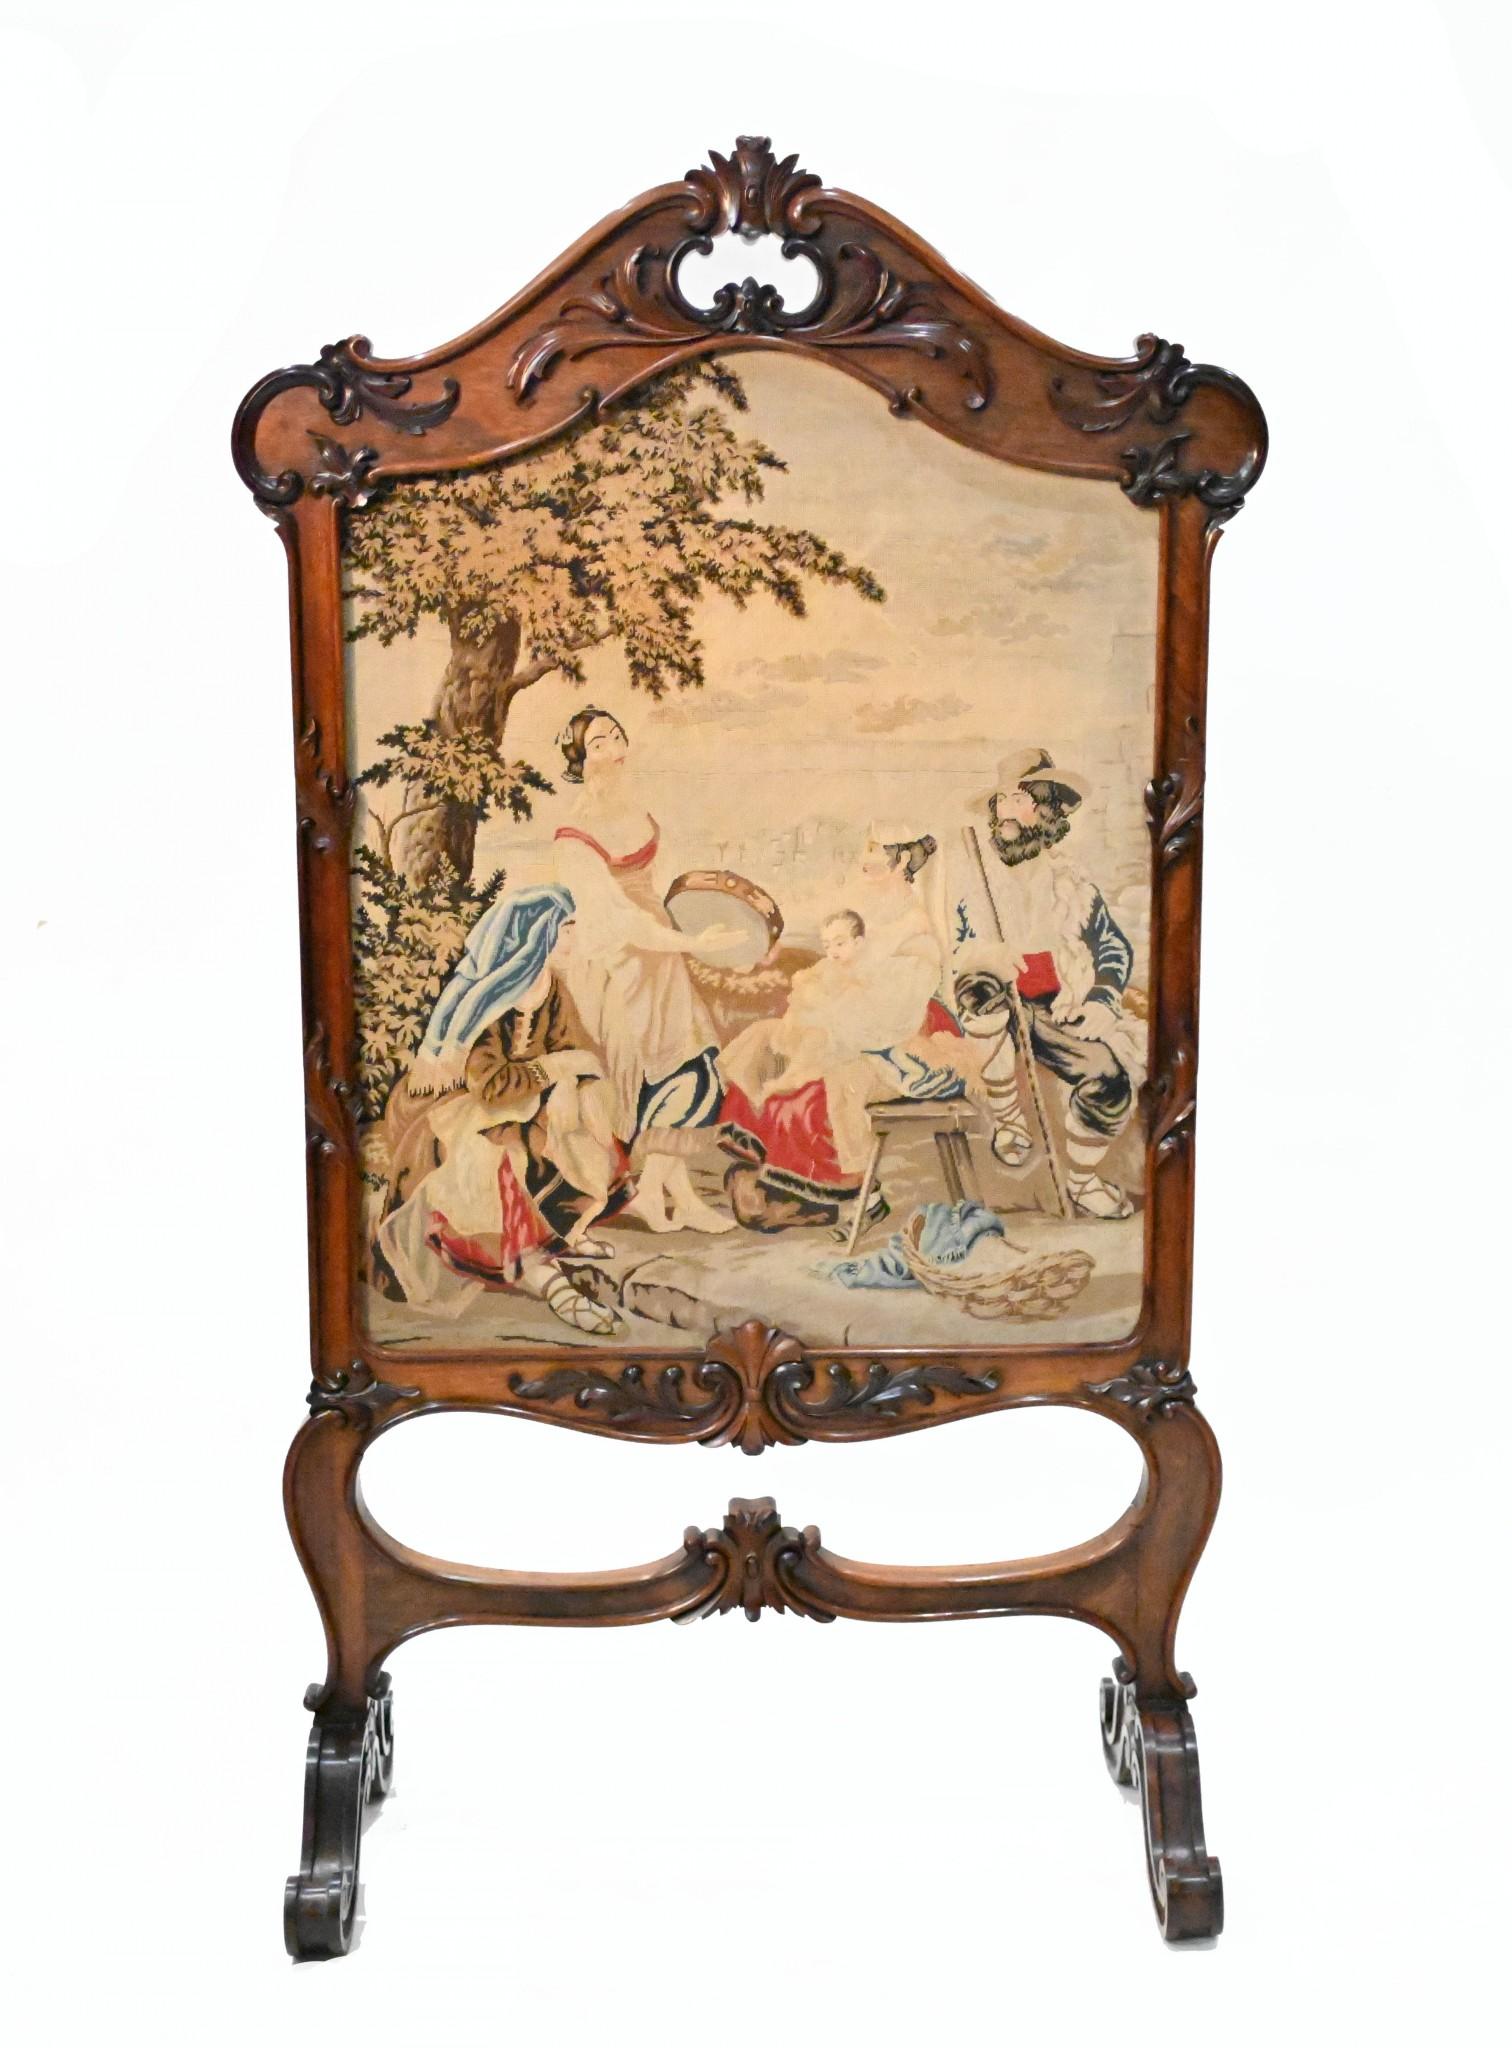 Wonderful Victorian tapestry screen showing a delightful English pastoral scene
We date this to circa 1840 and it comes in the mahogany frame which features hand carved details
The scene shows the group frolicking under the tree with the maiden